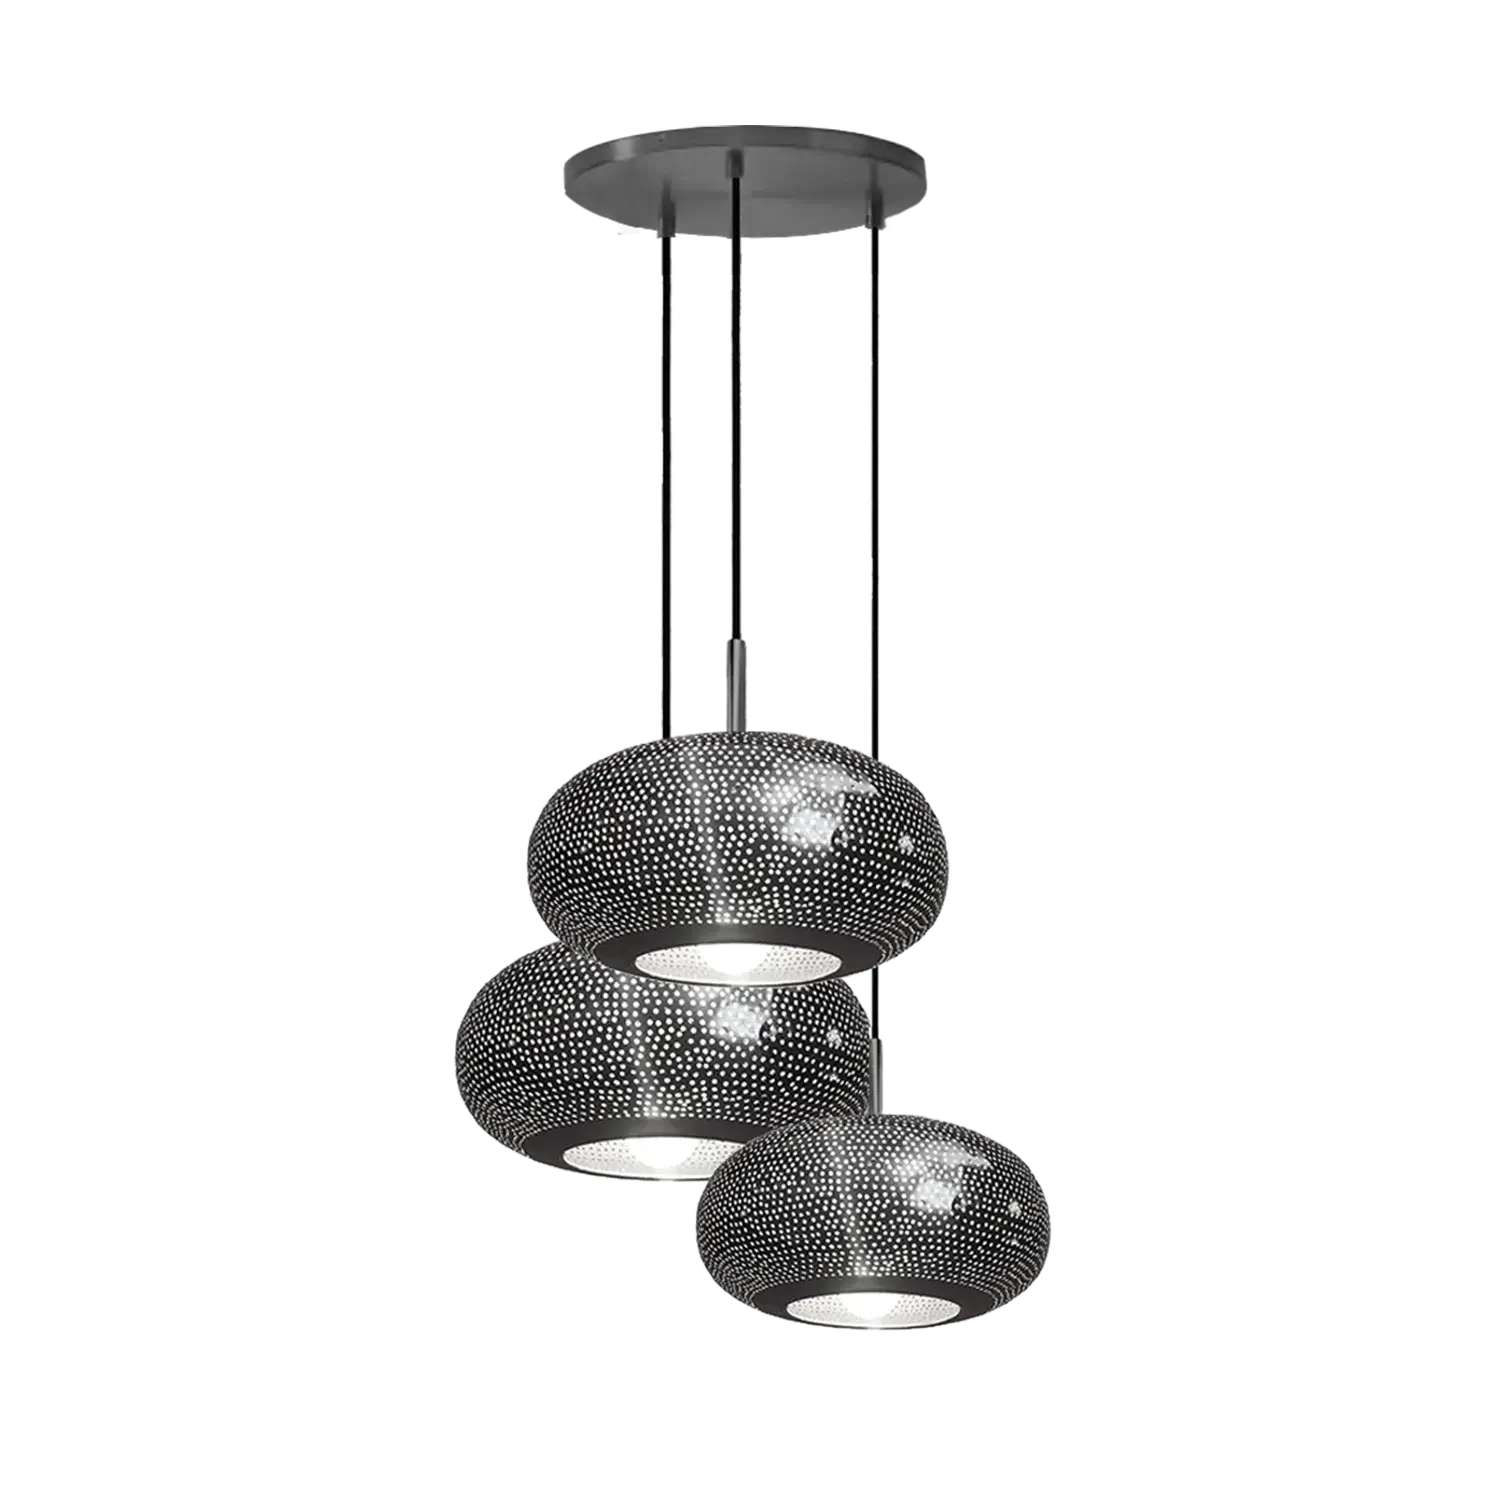 Dounia home chandelier in black made of Metal, Model: Lila 3